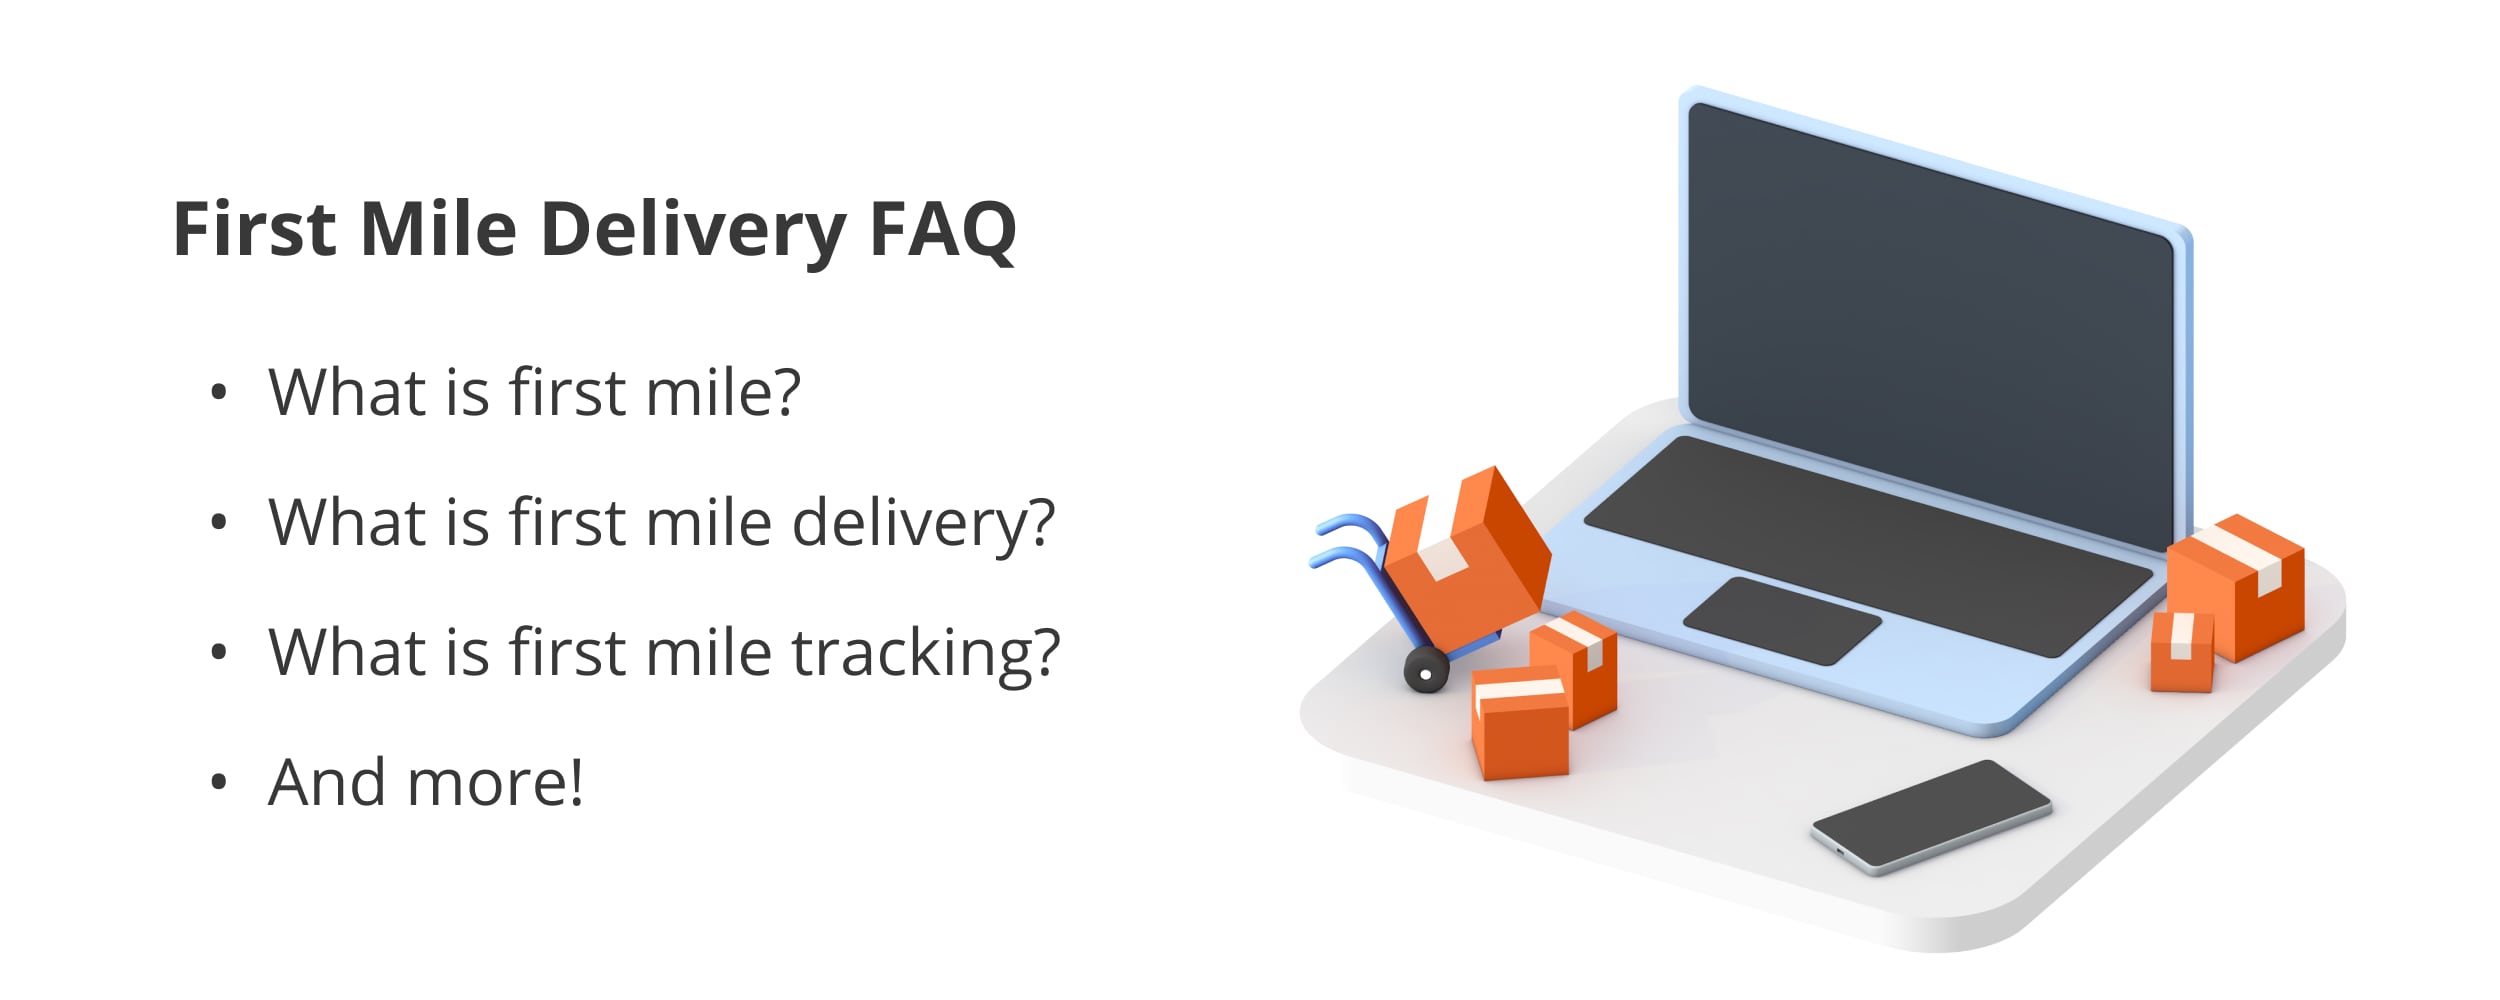 Frequently asked questions about first mile delivery and first mile in logistics.